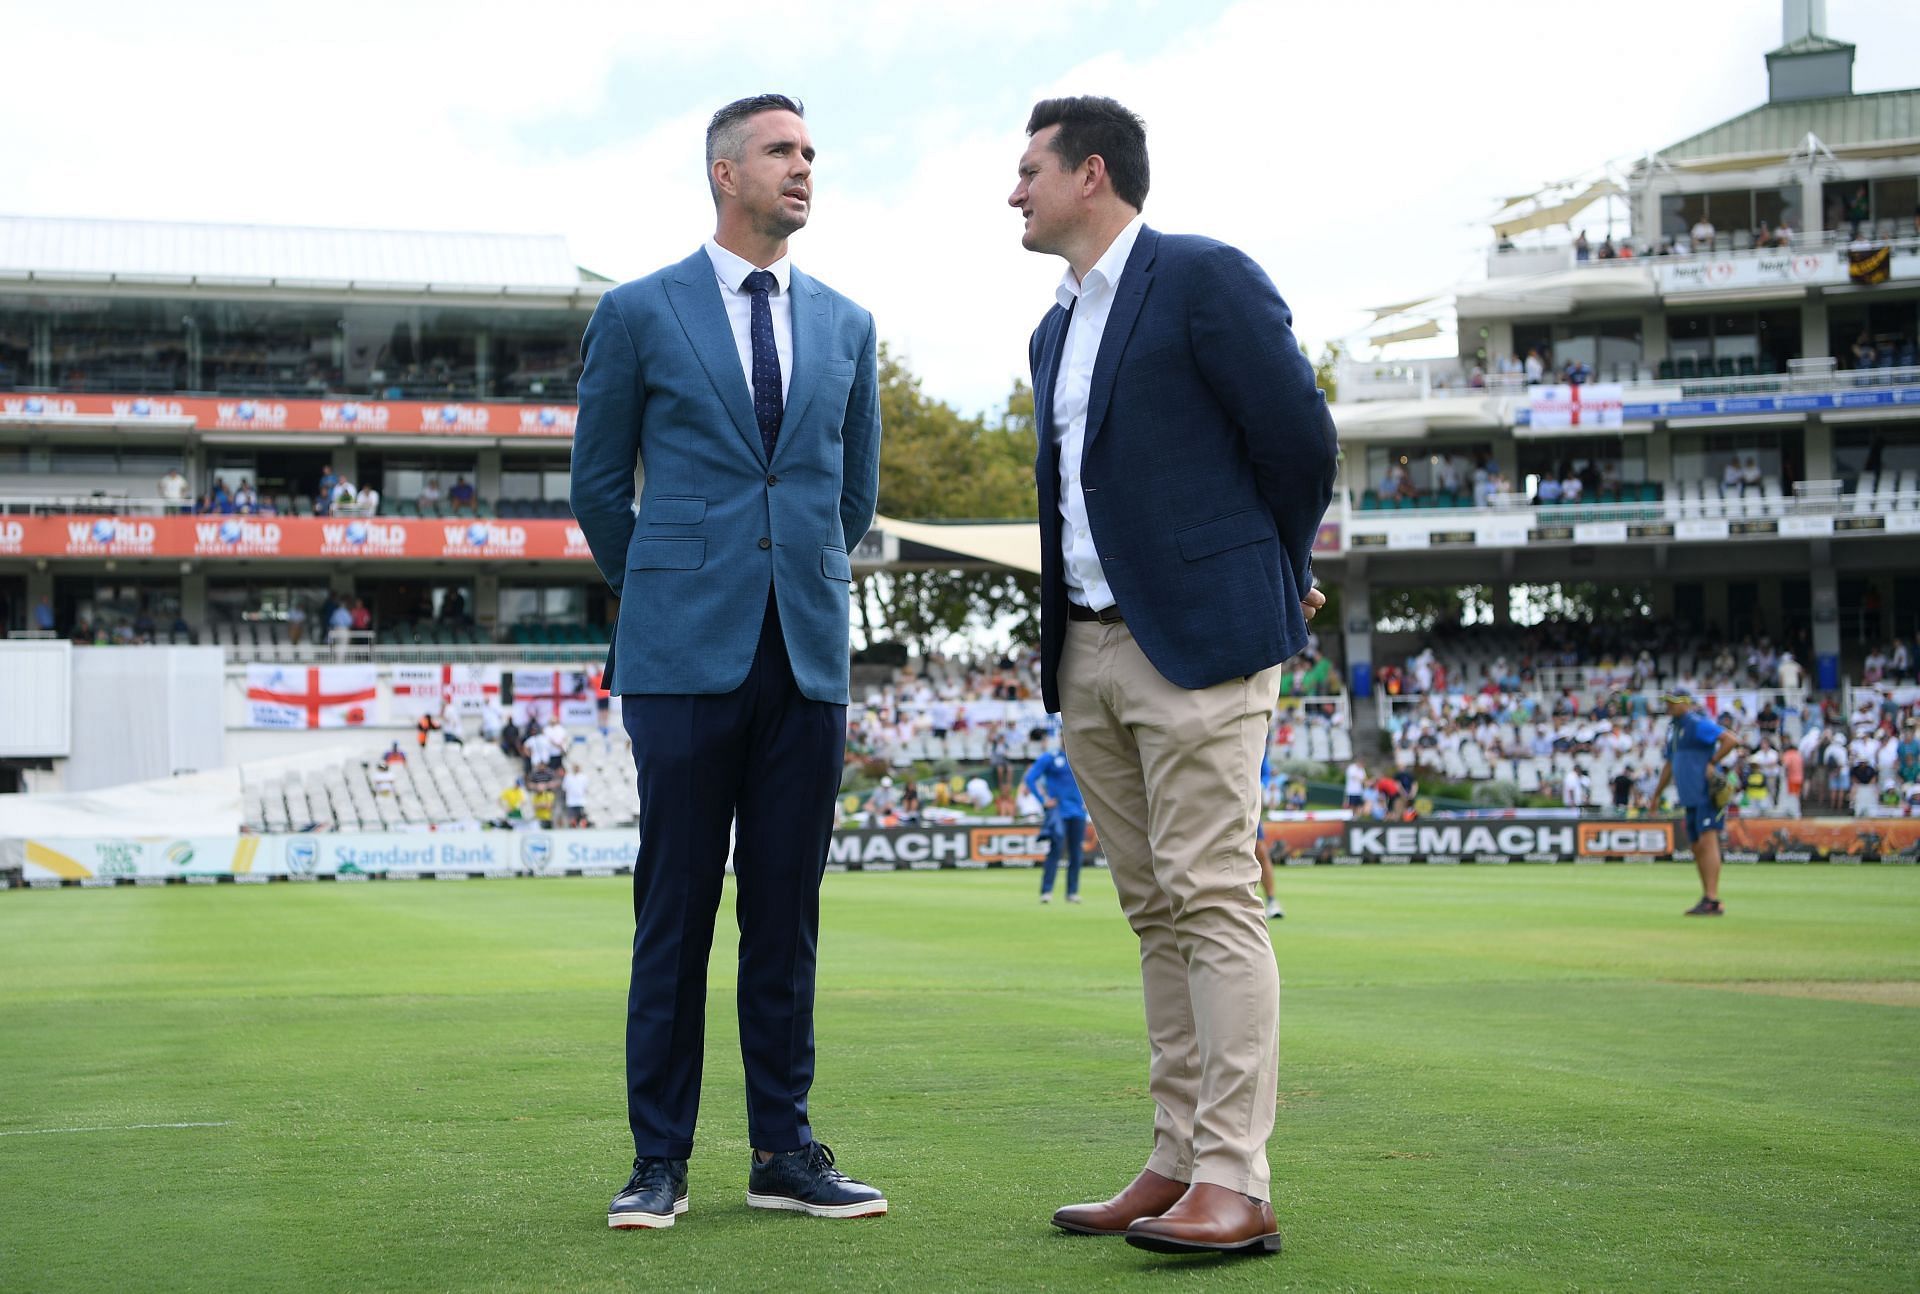 South Africa v England - 2nd Test: Day 1